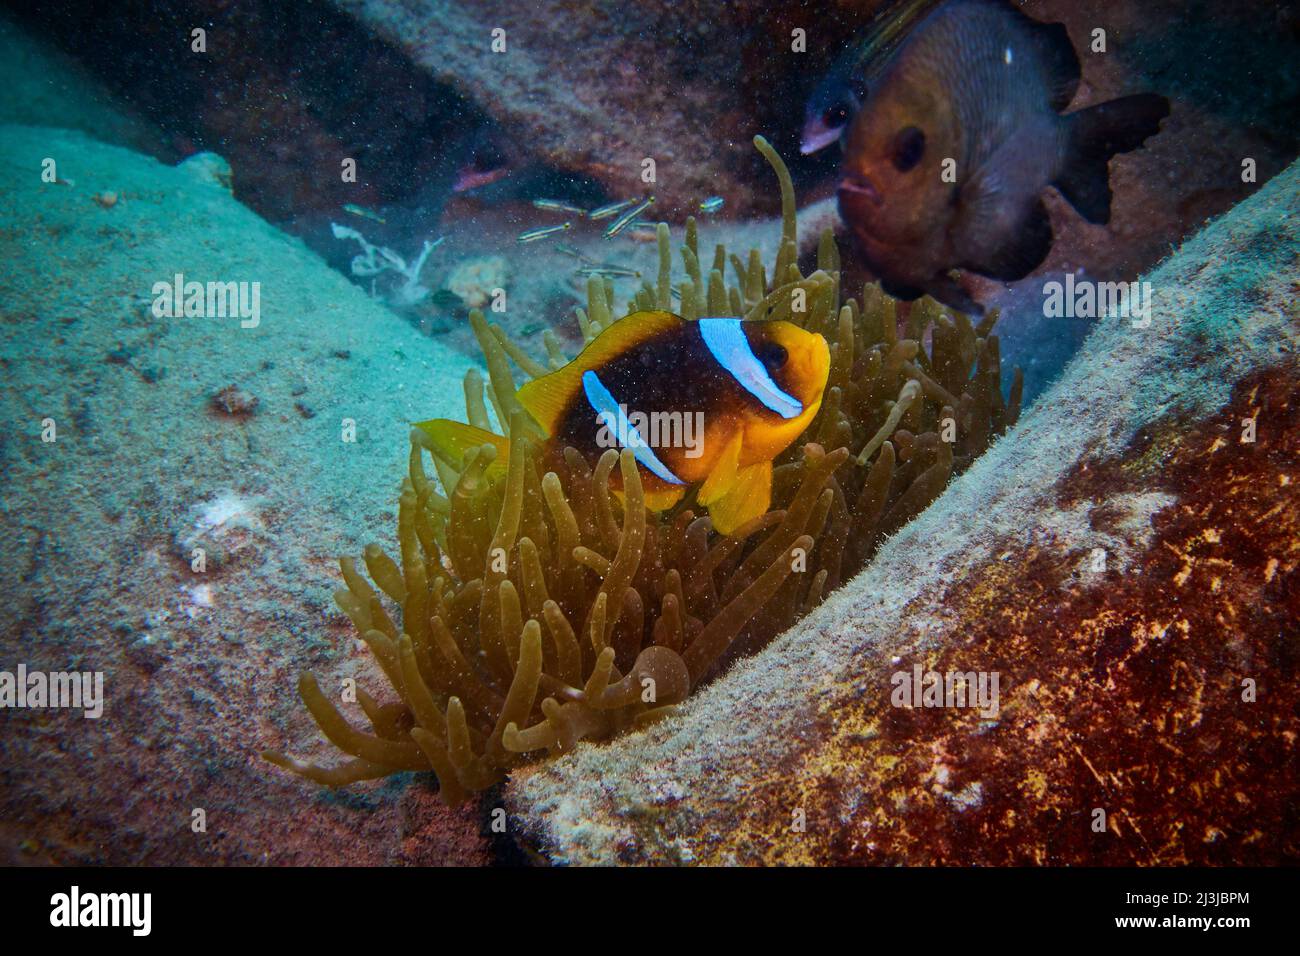 Scuba diving in the Red Sea, Makadi Bay, North Africa, Stock Photo